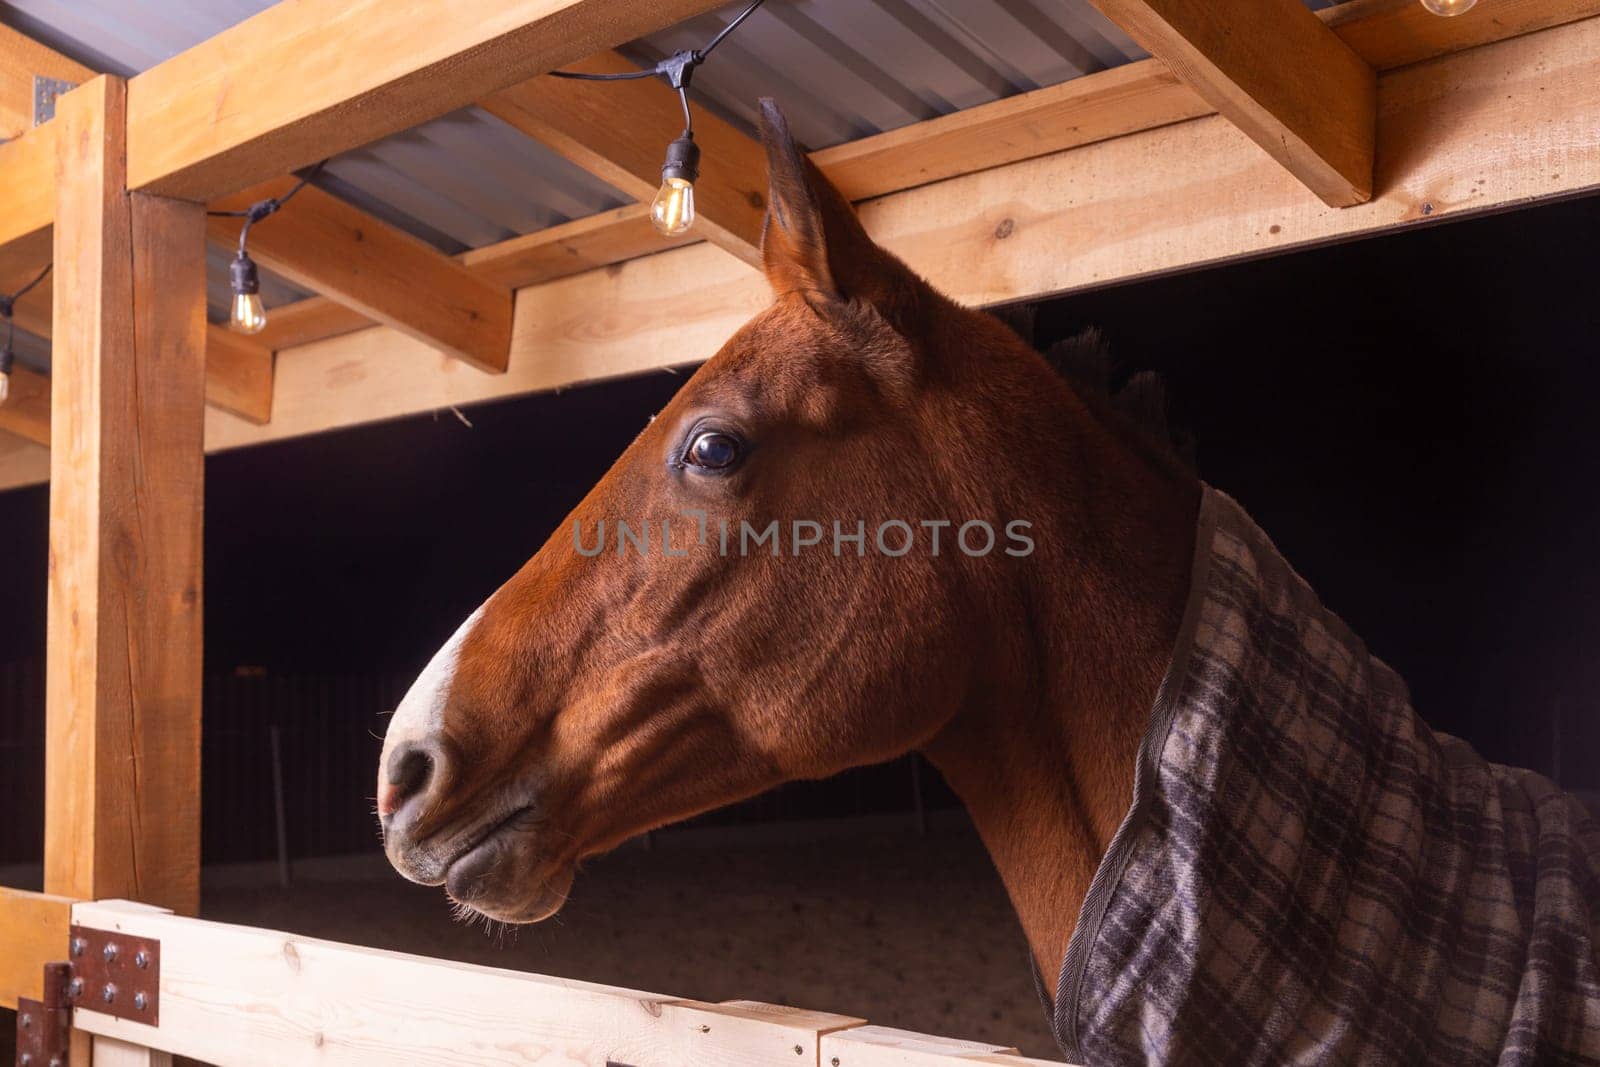 Portrait close up of a purebred saddle horse wearing checkered blanket against cold weather standing in shelter in paddock